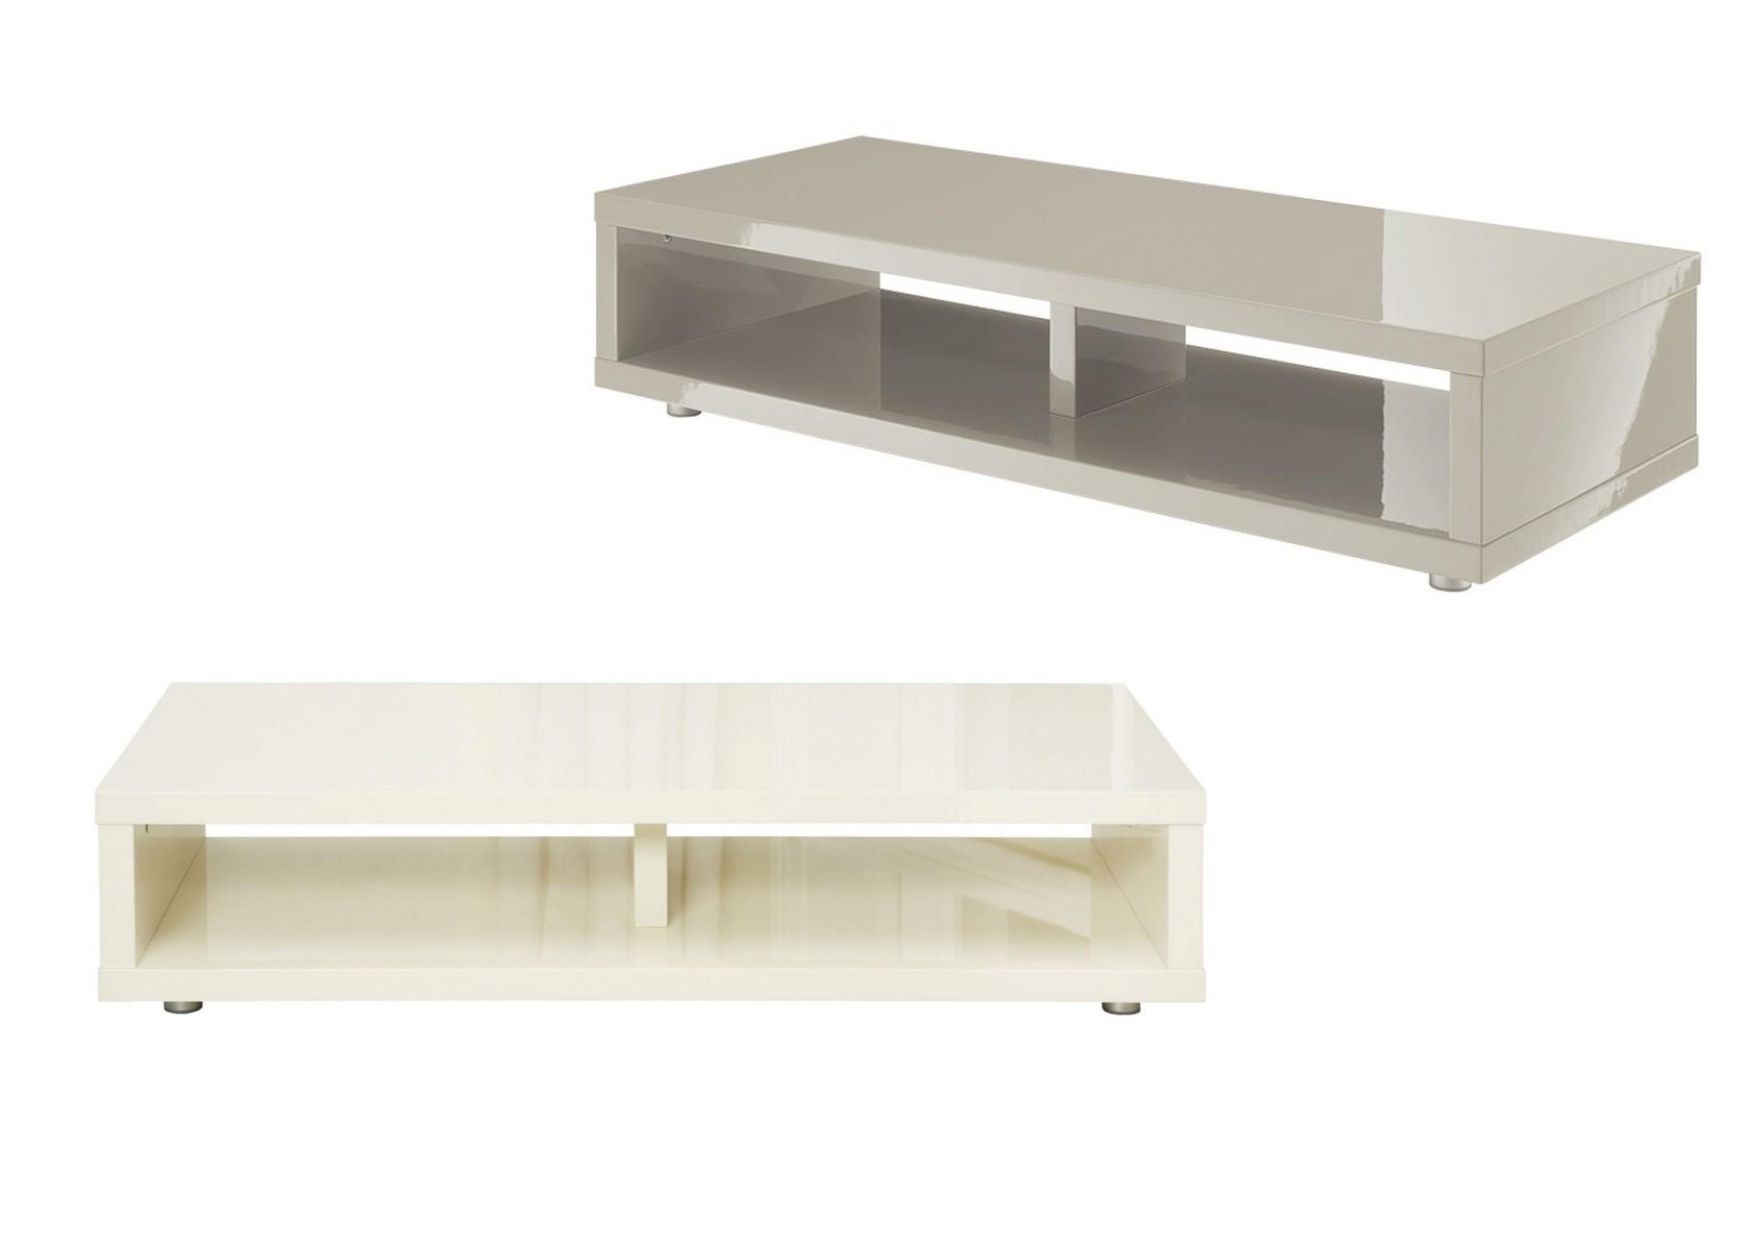 Puro High Gloss Cream Or Stone Tv Media Stand Inside Latest Cream High Gloss Tv Cabinets (View 3 of 20)